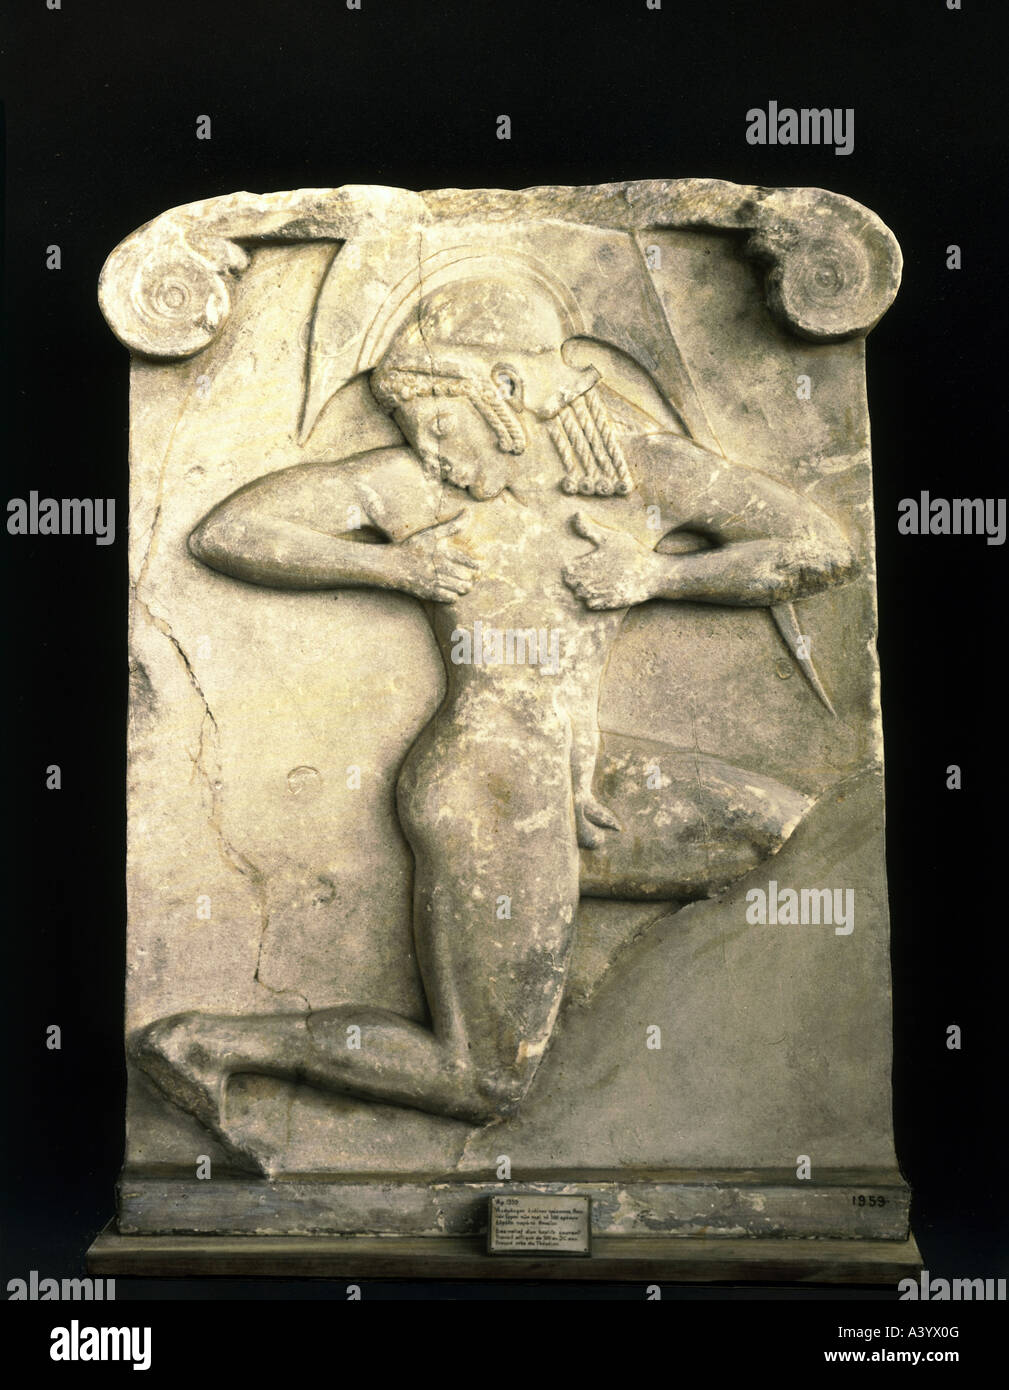 fine arts, ancient world, Greece, sculpture, relief, hoplite runner stele, circa 520/510 BC, Attic marble, National Museum Athen Stock Photo